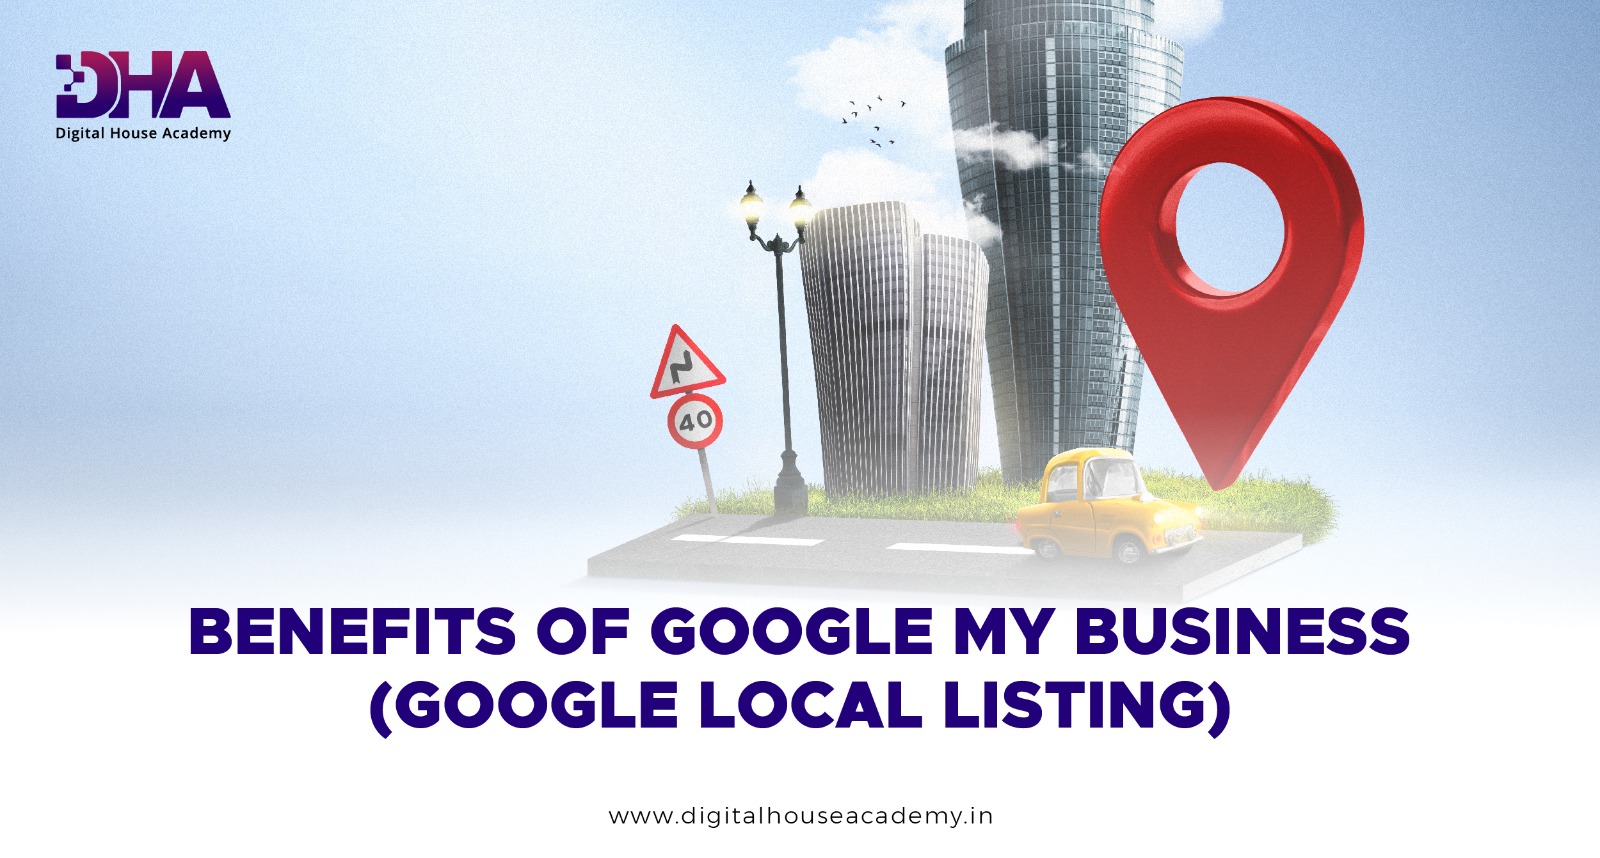 Benefits of Google My Business (Google Local Listing)